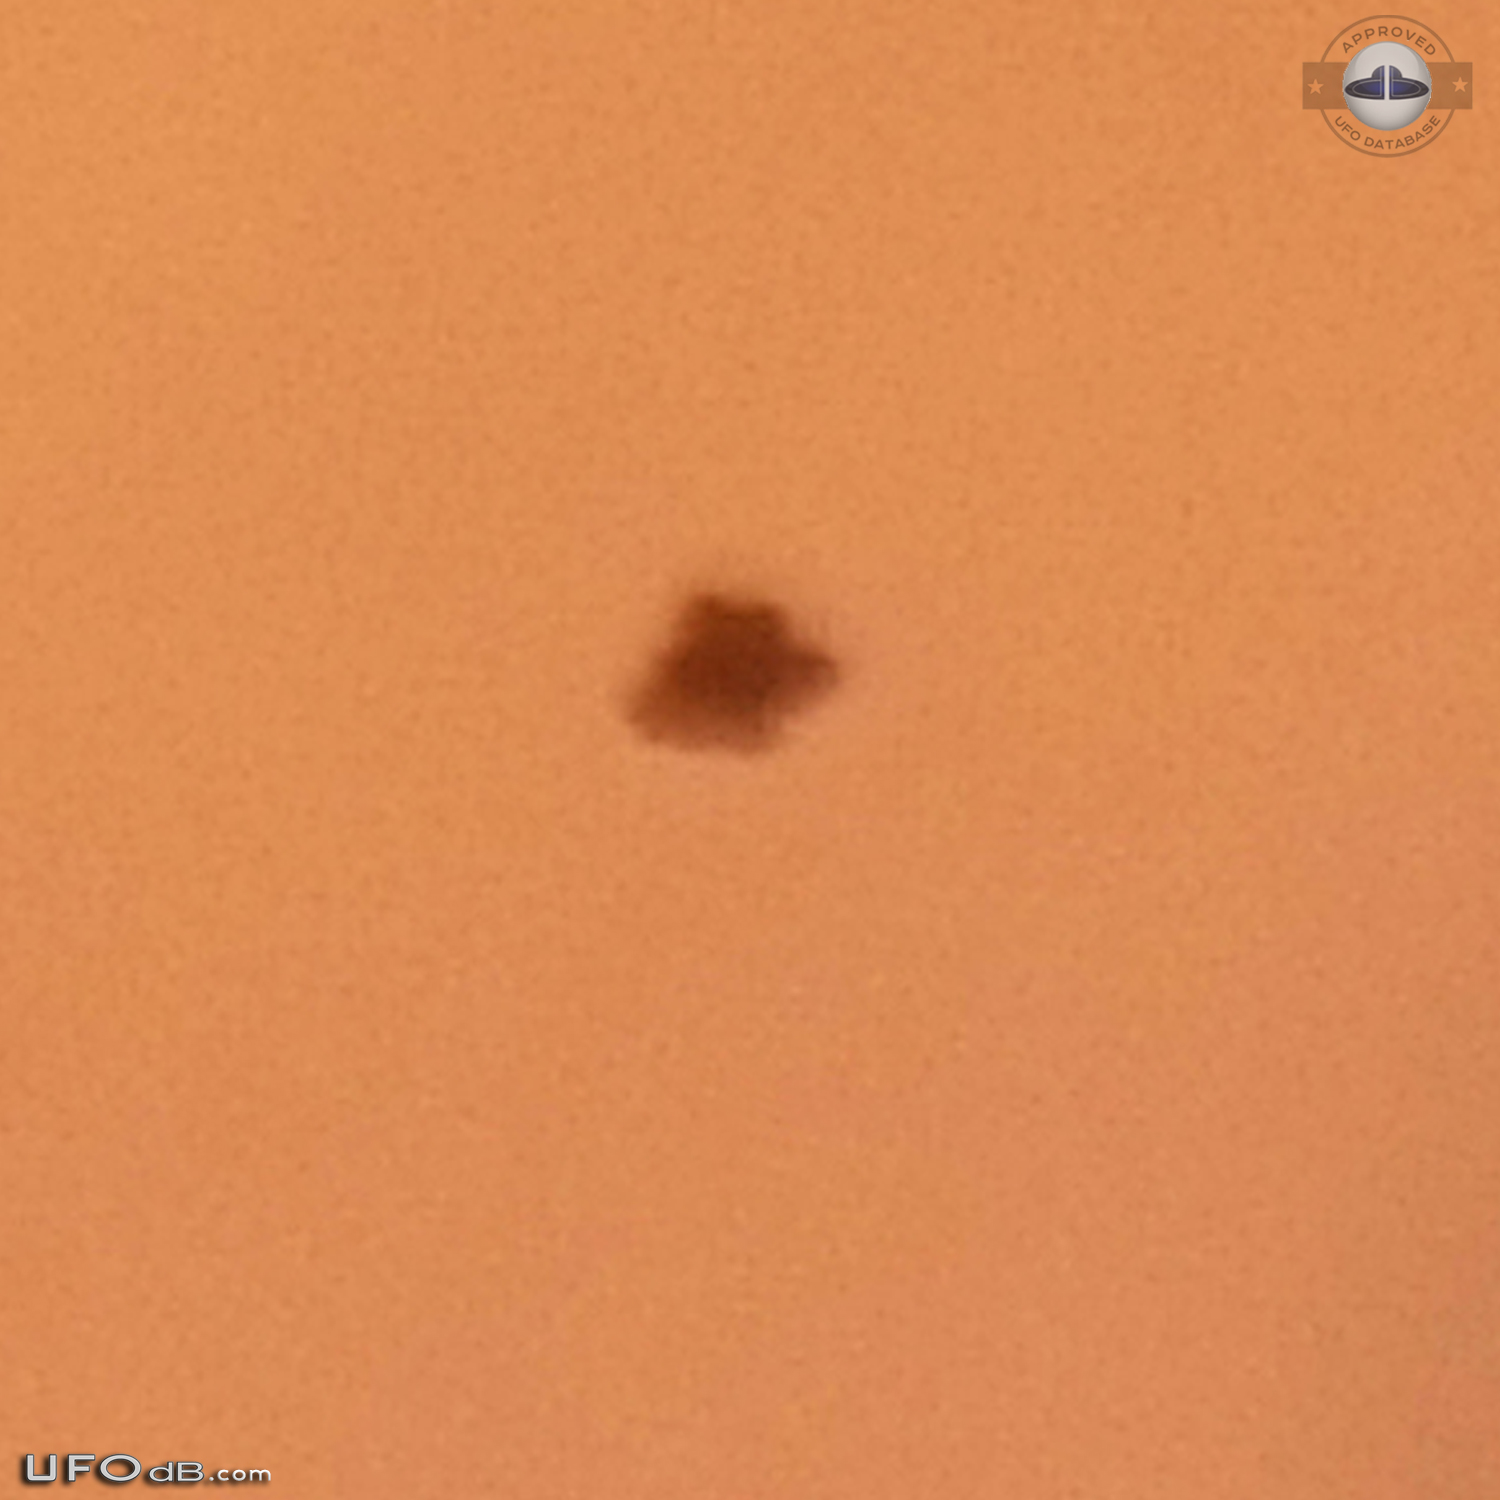 3 witness saw a black bell UFO disappearing in clouds - Australia 2013 UFO Picture #551-3